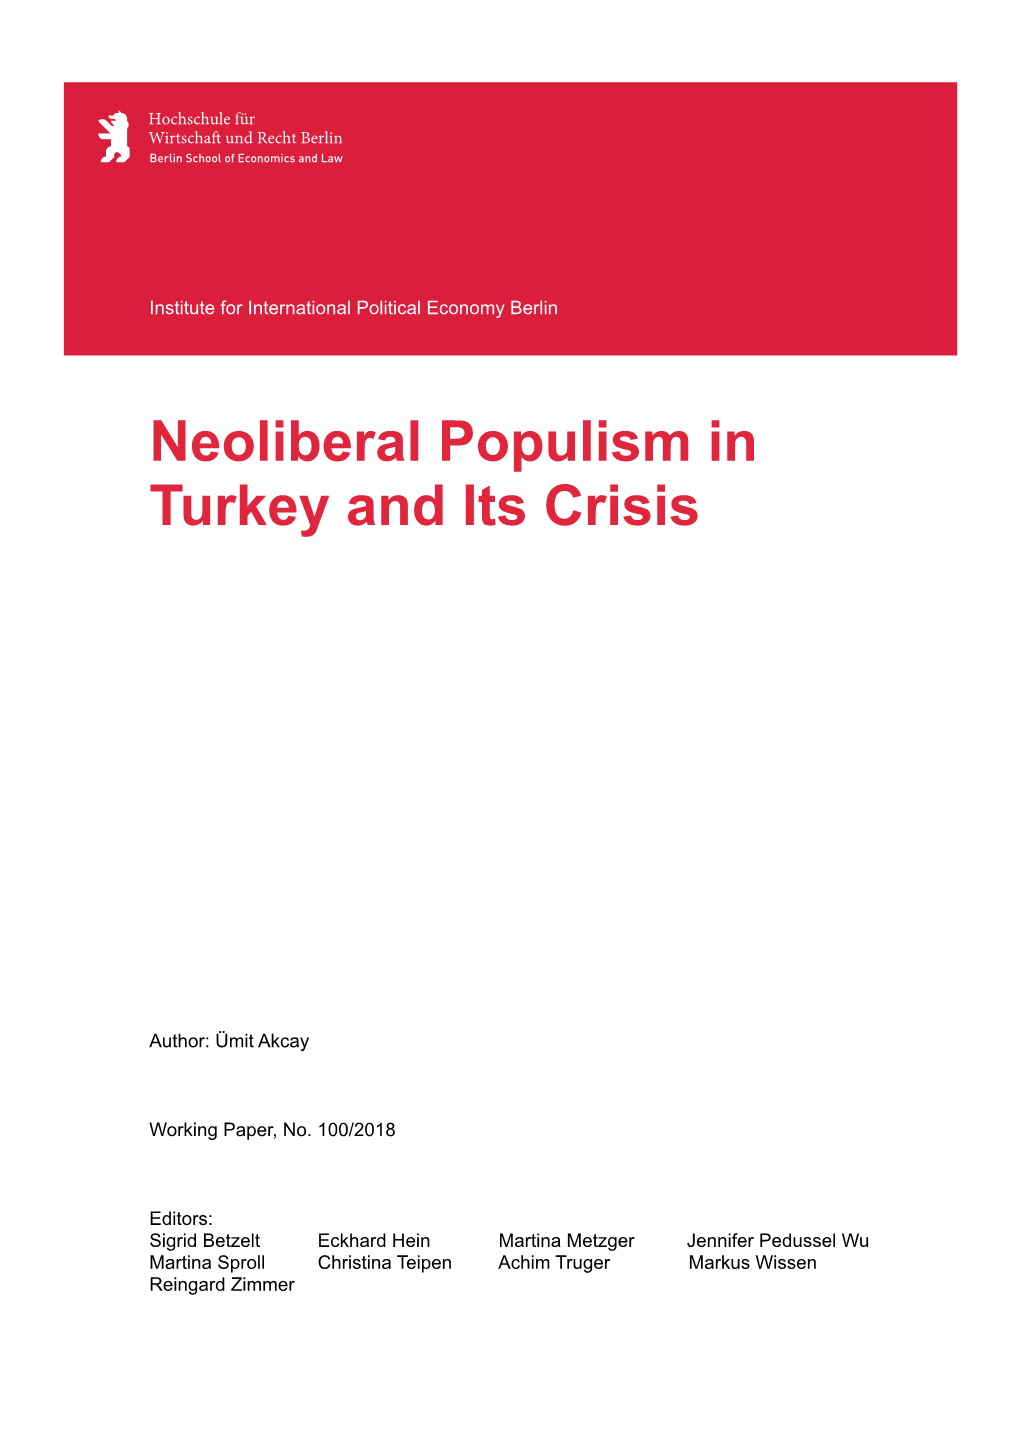 Neoliberal Populism in Turkey and Its Crisis